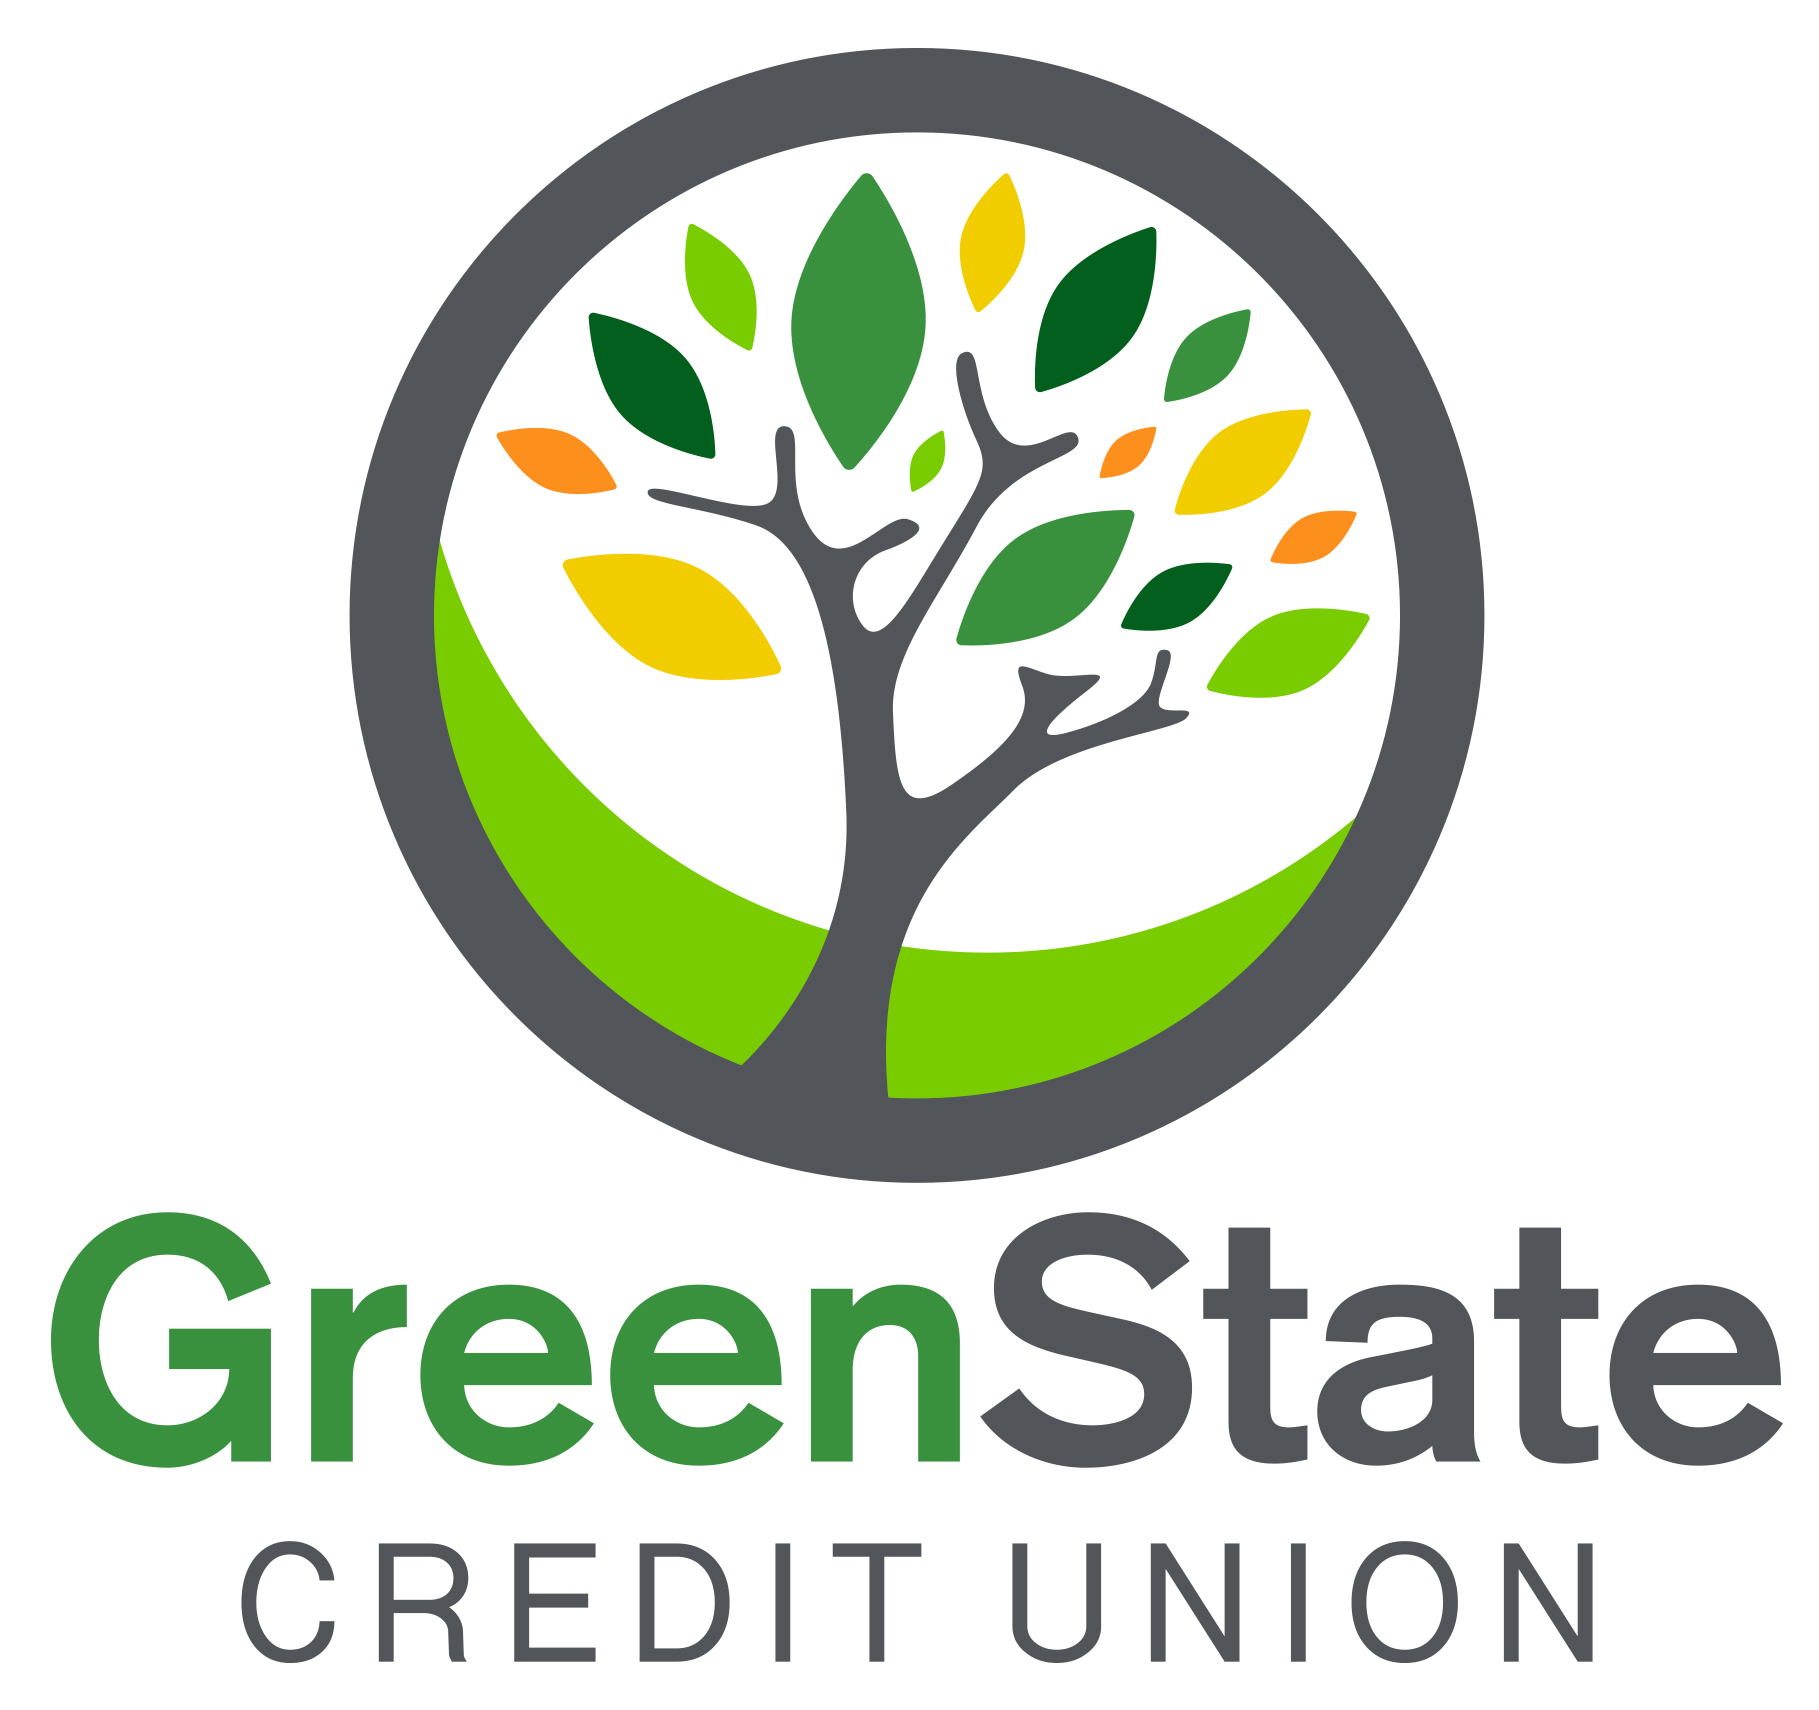 greenstate credit union logo with tree and leaves